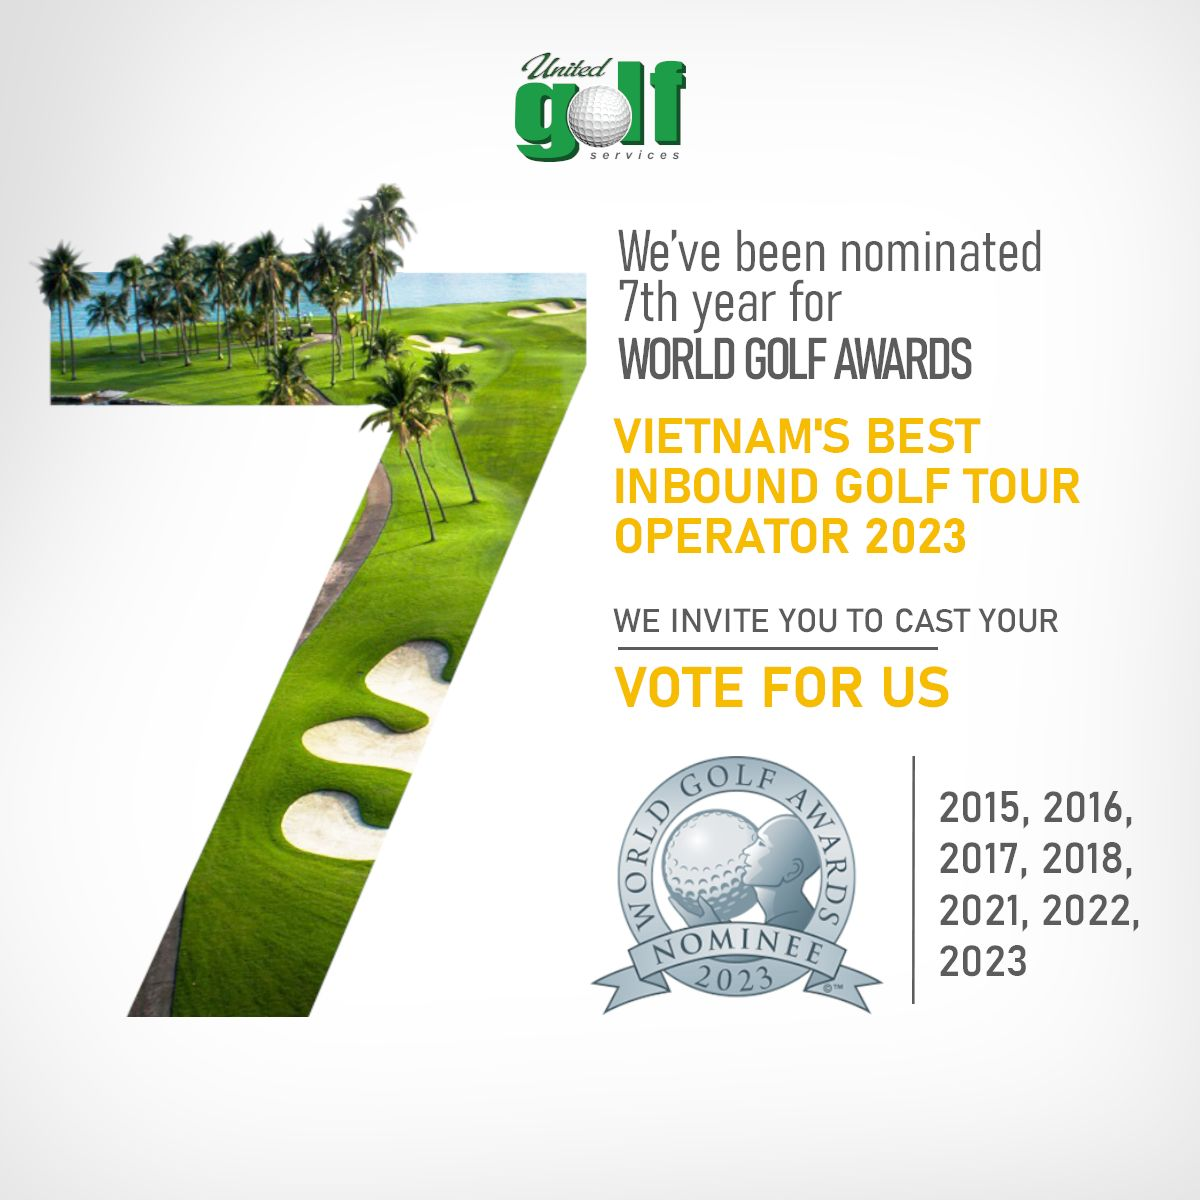 Unigolf Is Nominated For The 7th Time In The Category Of â€œVietnamâ€™s Best Inbound Golf Tour Operator 2023